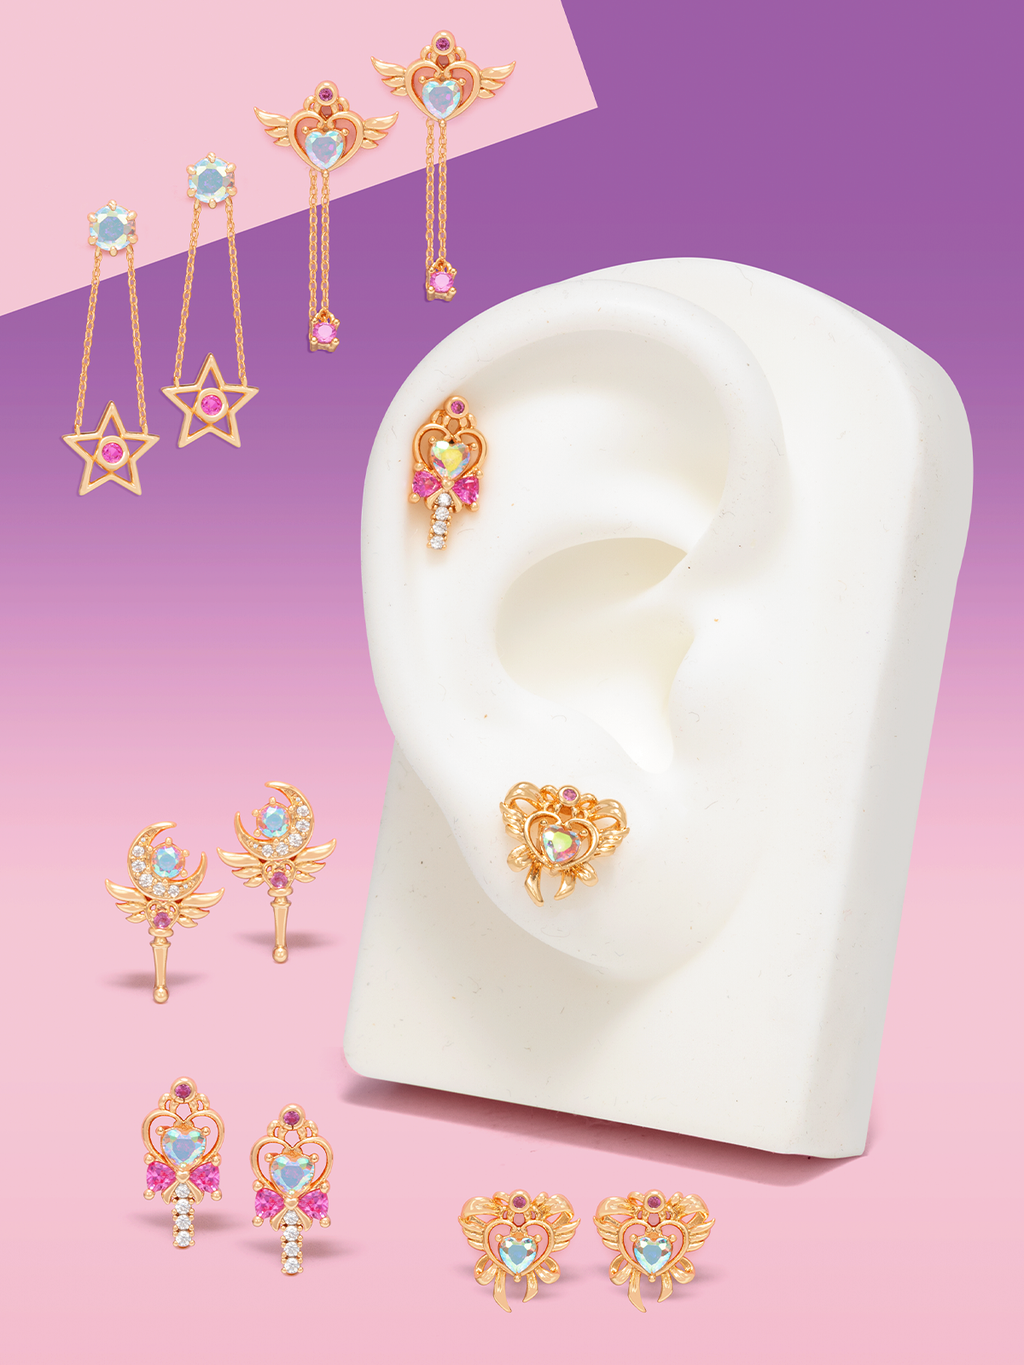 Galaxy Dreams Candle - Animated Earring Collection